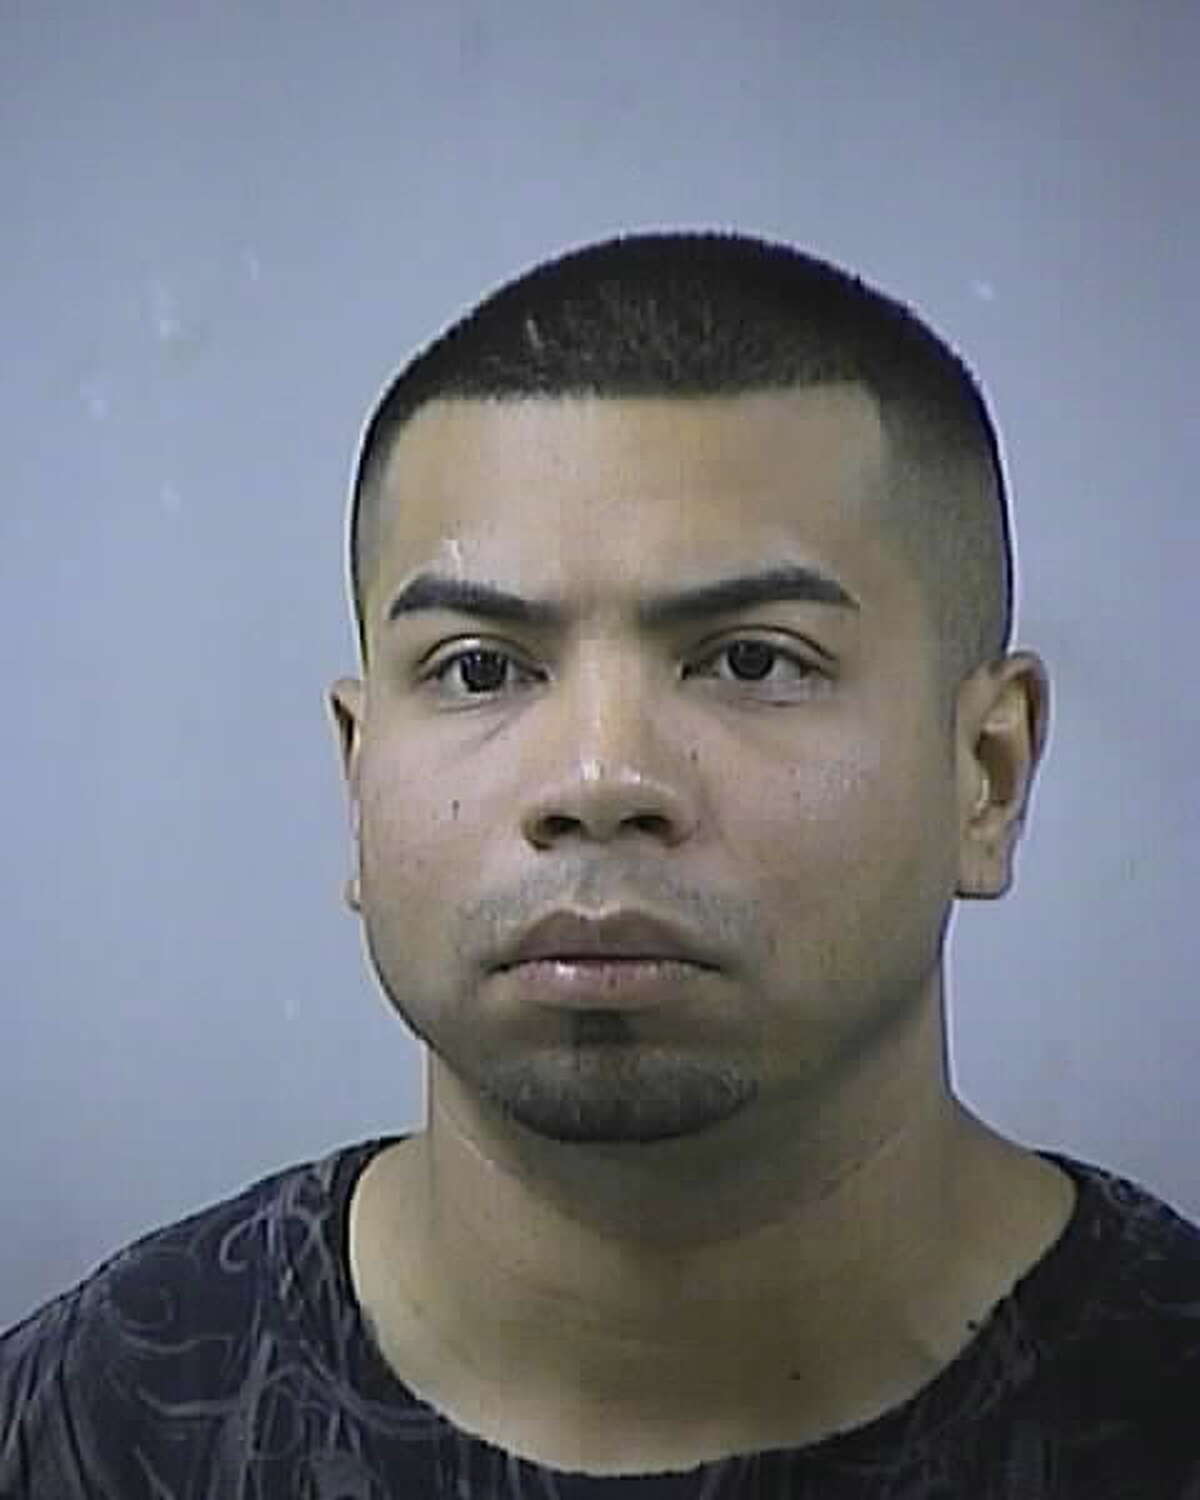 Here's what to know about the botched 2017 armed robbery at Rolling Oaks Mall.1. Police identified Jose Luis Rojas, 35, as one of the suspects in the Rolling Oaks Mall shooting. He was sentenced to life plus 20 years in prison on Friday, April 6. 2018 after pleading guilty.